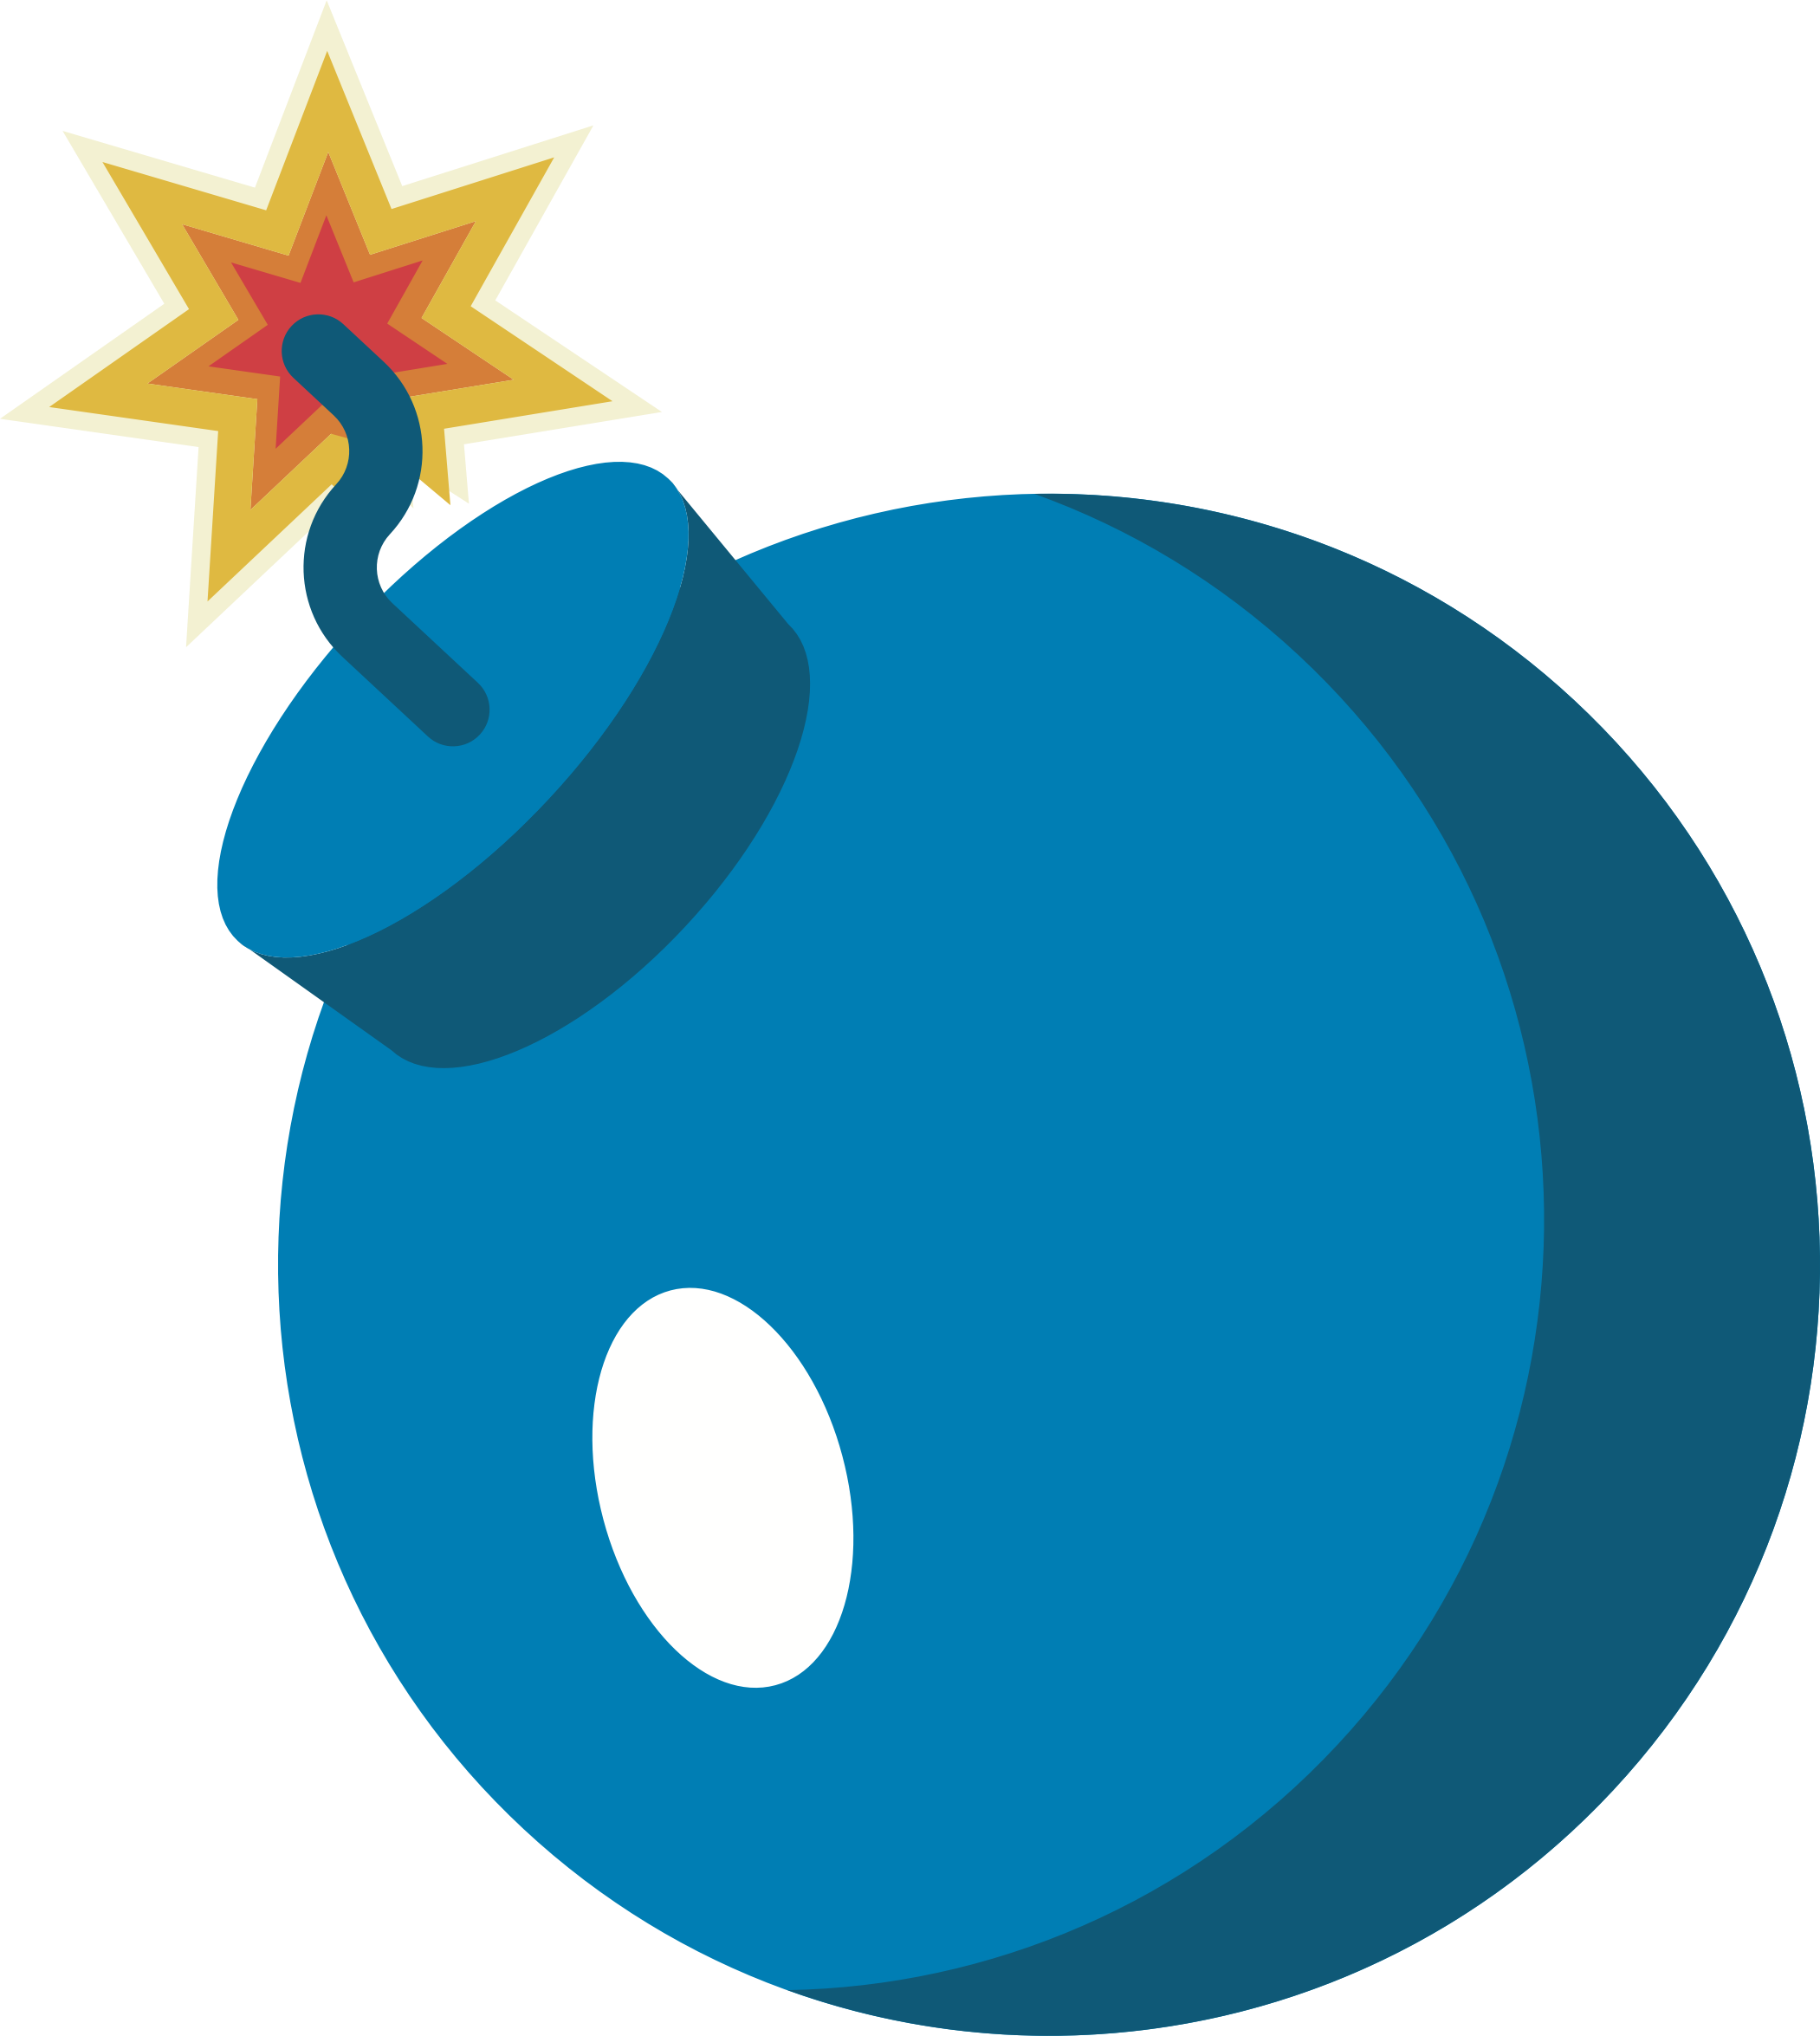 Download Clipart - Cartoon Bomb Clipart PNG Image with No Background ...